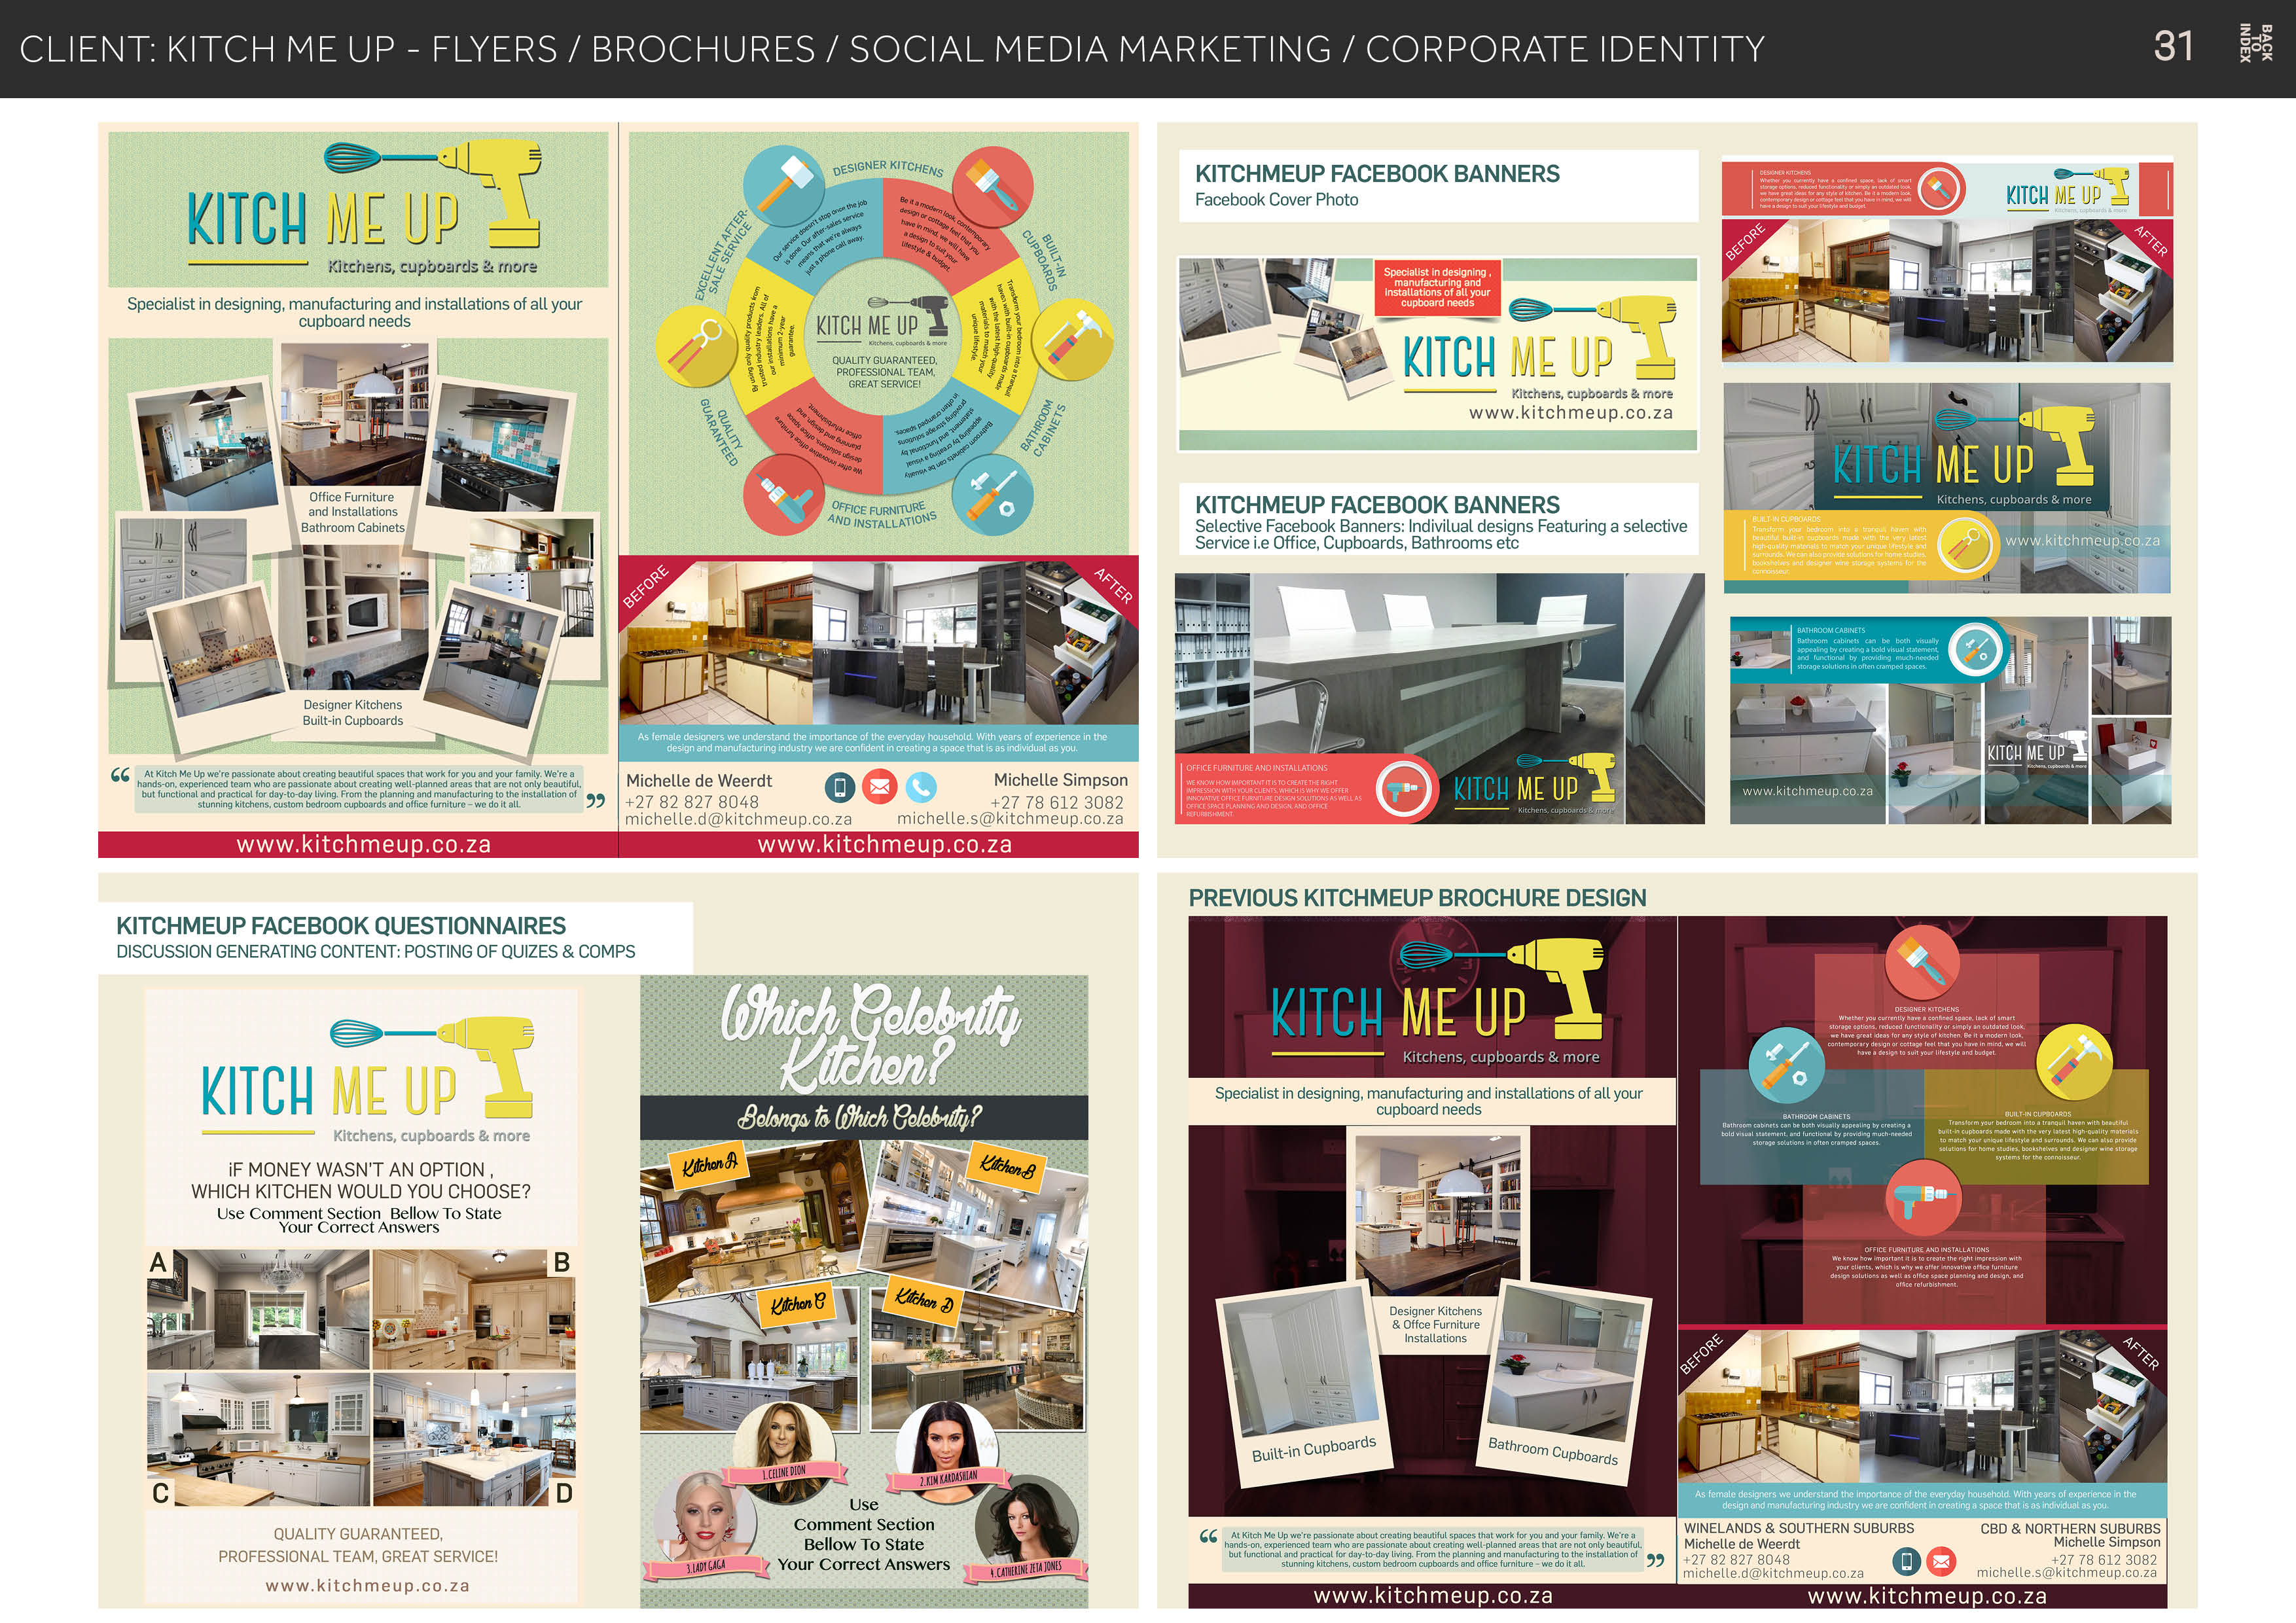 CLIENT: KITCH ME UP - FLYERS / BROCHURES / SOCIAL MEDIA MARKETING / CORPORATE IDENTITY

 

   
     

S—_
ME Up 2 =

rds &amp; more

QESIONER KITCHEy

arch |

Kitchens, cup

 

     
 

GREAT SERVICE!

£5 1 13 2
Specialist in designing, manufacturing and installations of all your + i 3 - 1 13
: if) 131 /
cupboard needs HH KITCH ME up ih
s 8 - §
V7 till QUALITY GUARANTE i431 7
£1 PROFESSIONAL TEAM, if $y

 
 

OFFICE pyrNTTURE
AND INSTALLATIONS

    
 
 

 

  
 

Designer Kitchens
Built-in Cupboards

www.kitchmeup.co.za

KITCHMEUP FACEBOOK QUESTIONNAIRES
DISCUSSION GENERATING CONTENT: POSTING OF QUIZES &amp; COMPS

Ep

KITCH

iF MONEY WASN'T AN OPTION ,
WHICH KITCHEN WOULD YOU CHOOSE?

Use Comment Section Bellow To State
Your Correct Answers

 

Comment Section
Bellow To State
7 Your Correct Answers

QUALITY GUARANTEED
PROFESSIONAL TEAM, GREAT SERVICE!

 

www.kitchmeup.co.za

 

KITCHMEUP FACEBOOK BANNERS

Facebook Cover Photo

Ele.
= Neri

Kitchens, cupboards &amp; mo

www.kitchmeup.co.za

 

re

 

KITCHMEUP FACEBOOK BANNERS
Selective Facebook Banners: Indivilual designs Featuring a selective
Service i.e Office, Cupboards, Bathrooms etc

     
 

 

EST TEER VE
rt

10 Gua
re beret
ERs
x

 

PREVIOUS KITCHMEUP BROCHURE DESIGN

Kitchens i &amp; more

Specialist in designing, manufacturing and installations of all your
cupboard needs

Designer Kitchens
&amp; Offce Furniture
stallations

CBD &amp; NORTHERN SUBURBS
Michelle Simpson

(0 =) Fae
0.28 1 s@kitchrmeup.co.za

www. kitchmeup.co.za

WINELANDS &amp; SOUTHERN SUBURBS
Michelle de Weerdt

 

www. kitchmeup.co.za